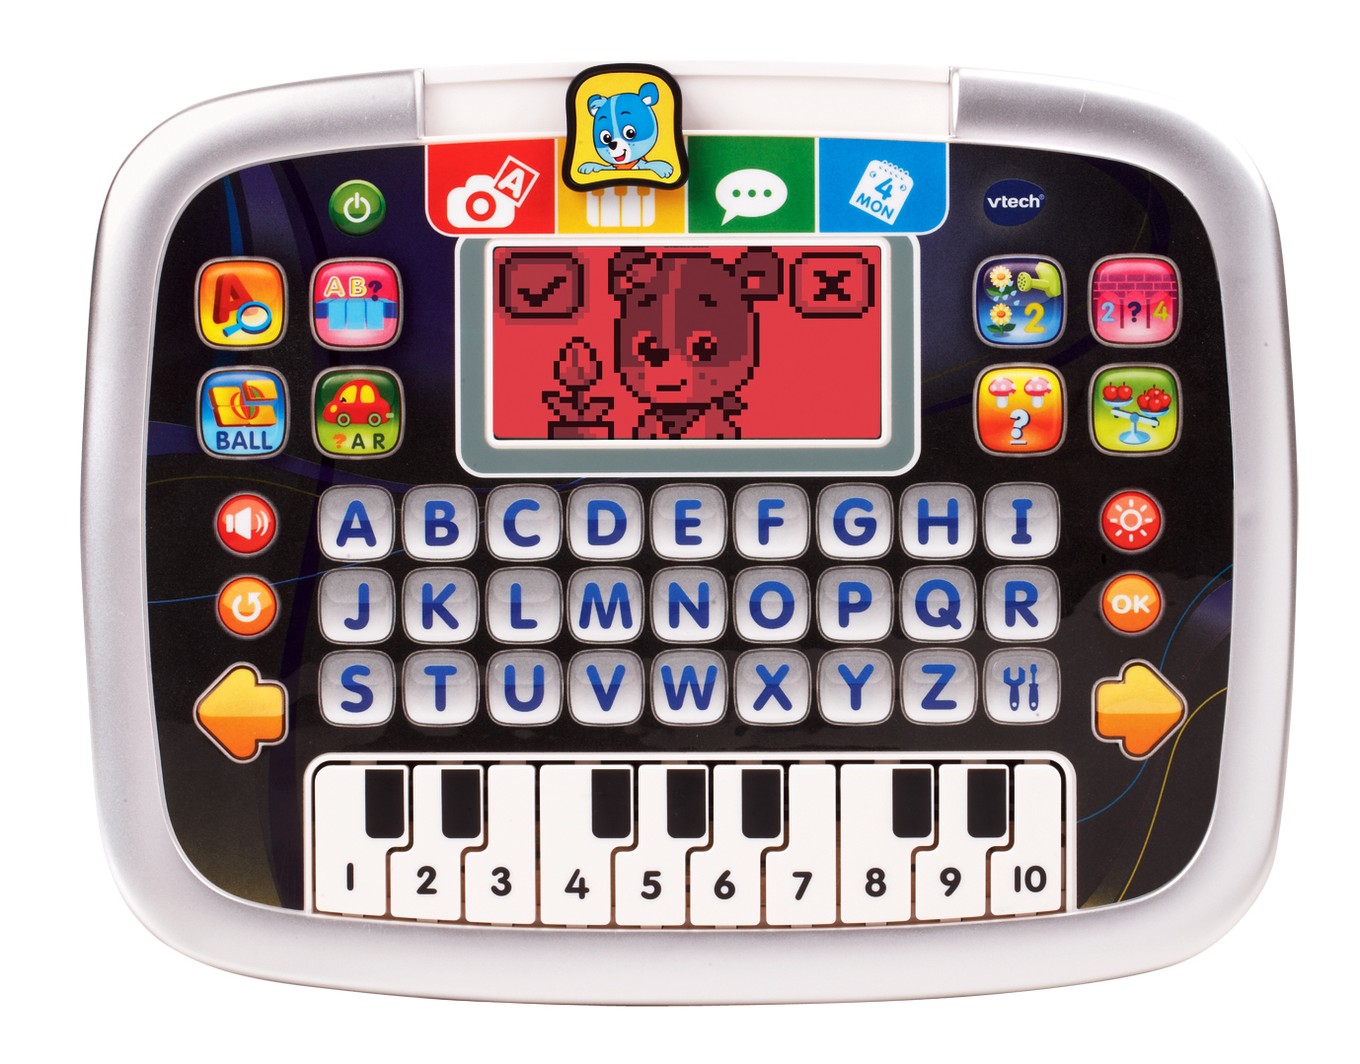 vtech tablet for 3 year old